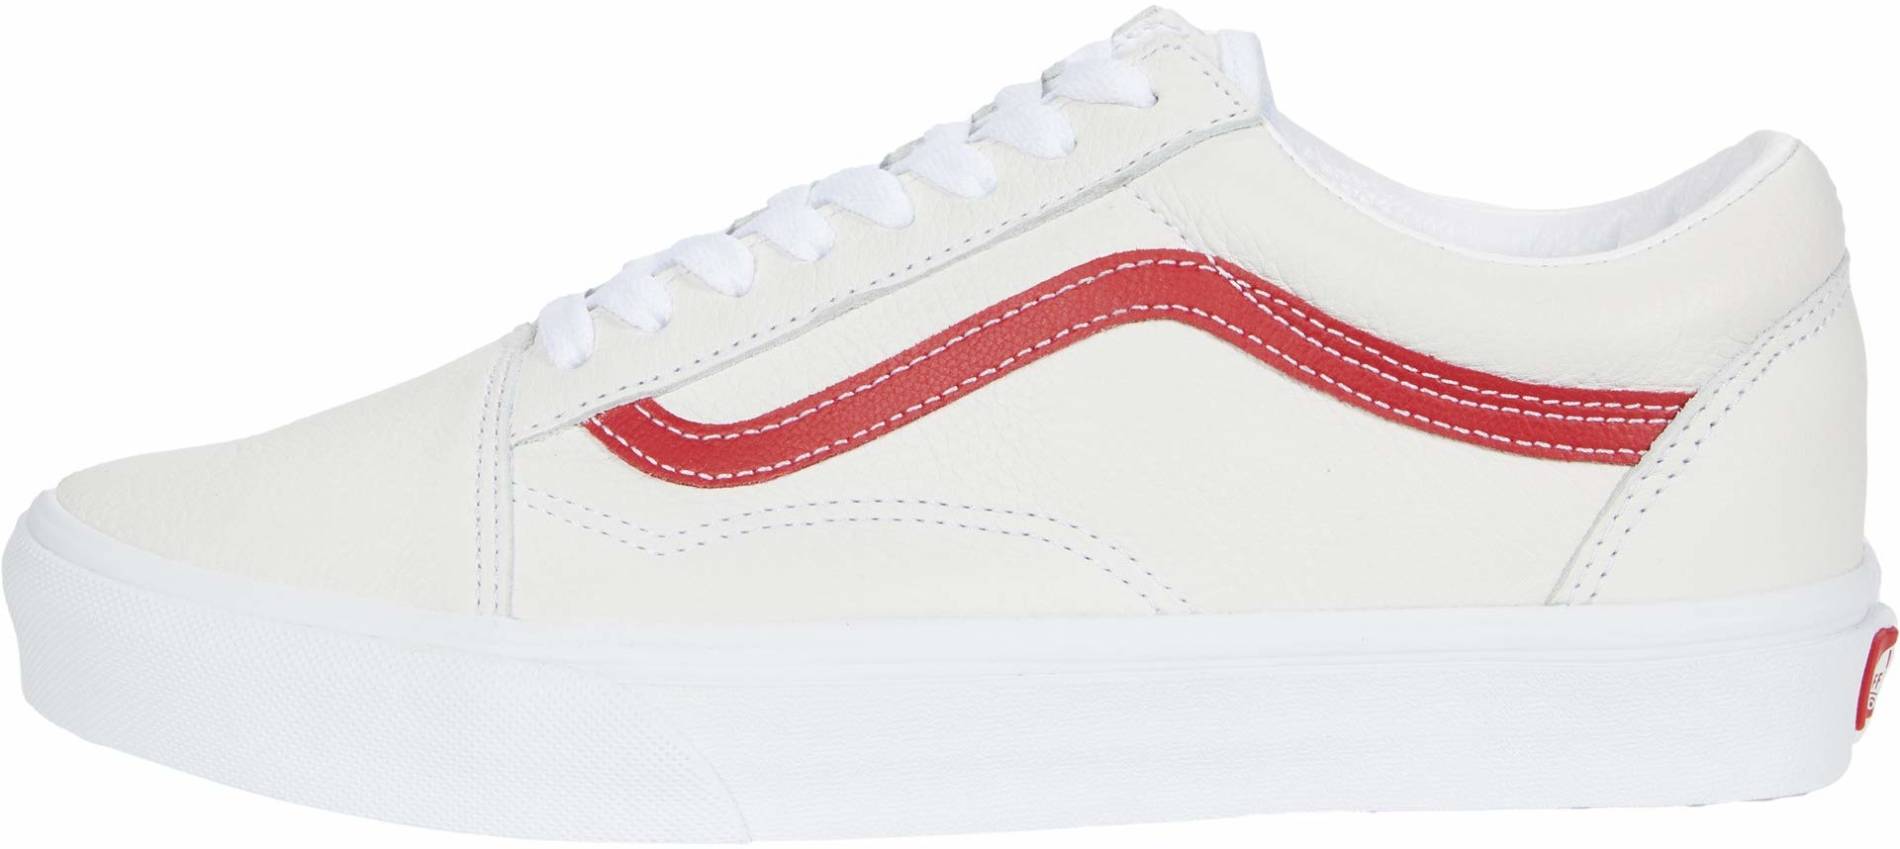 vans womens white leather